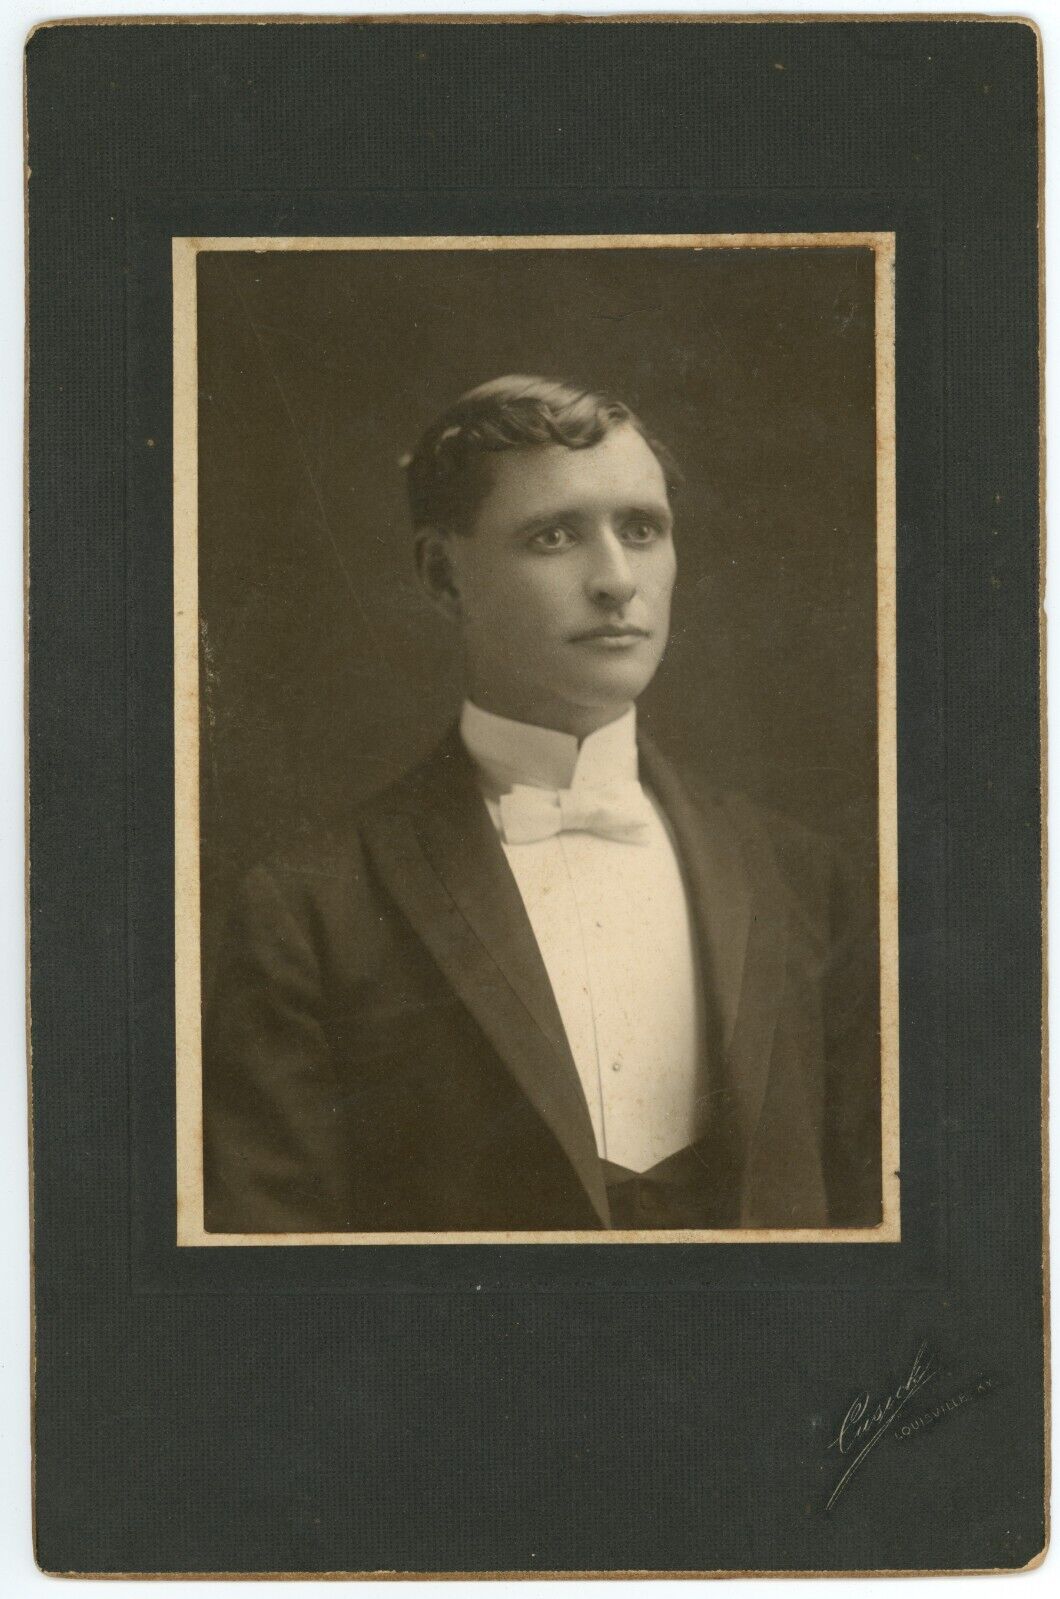 CIRCA 1890'S LARGE ANTIQUE CABINET CARD OF VERY HANDSOME LOOKING MAN IN SUIT